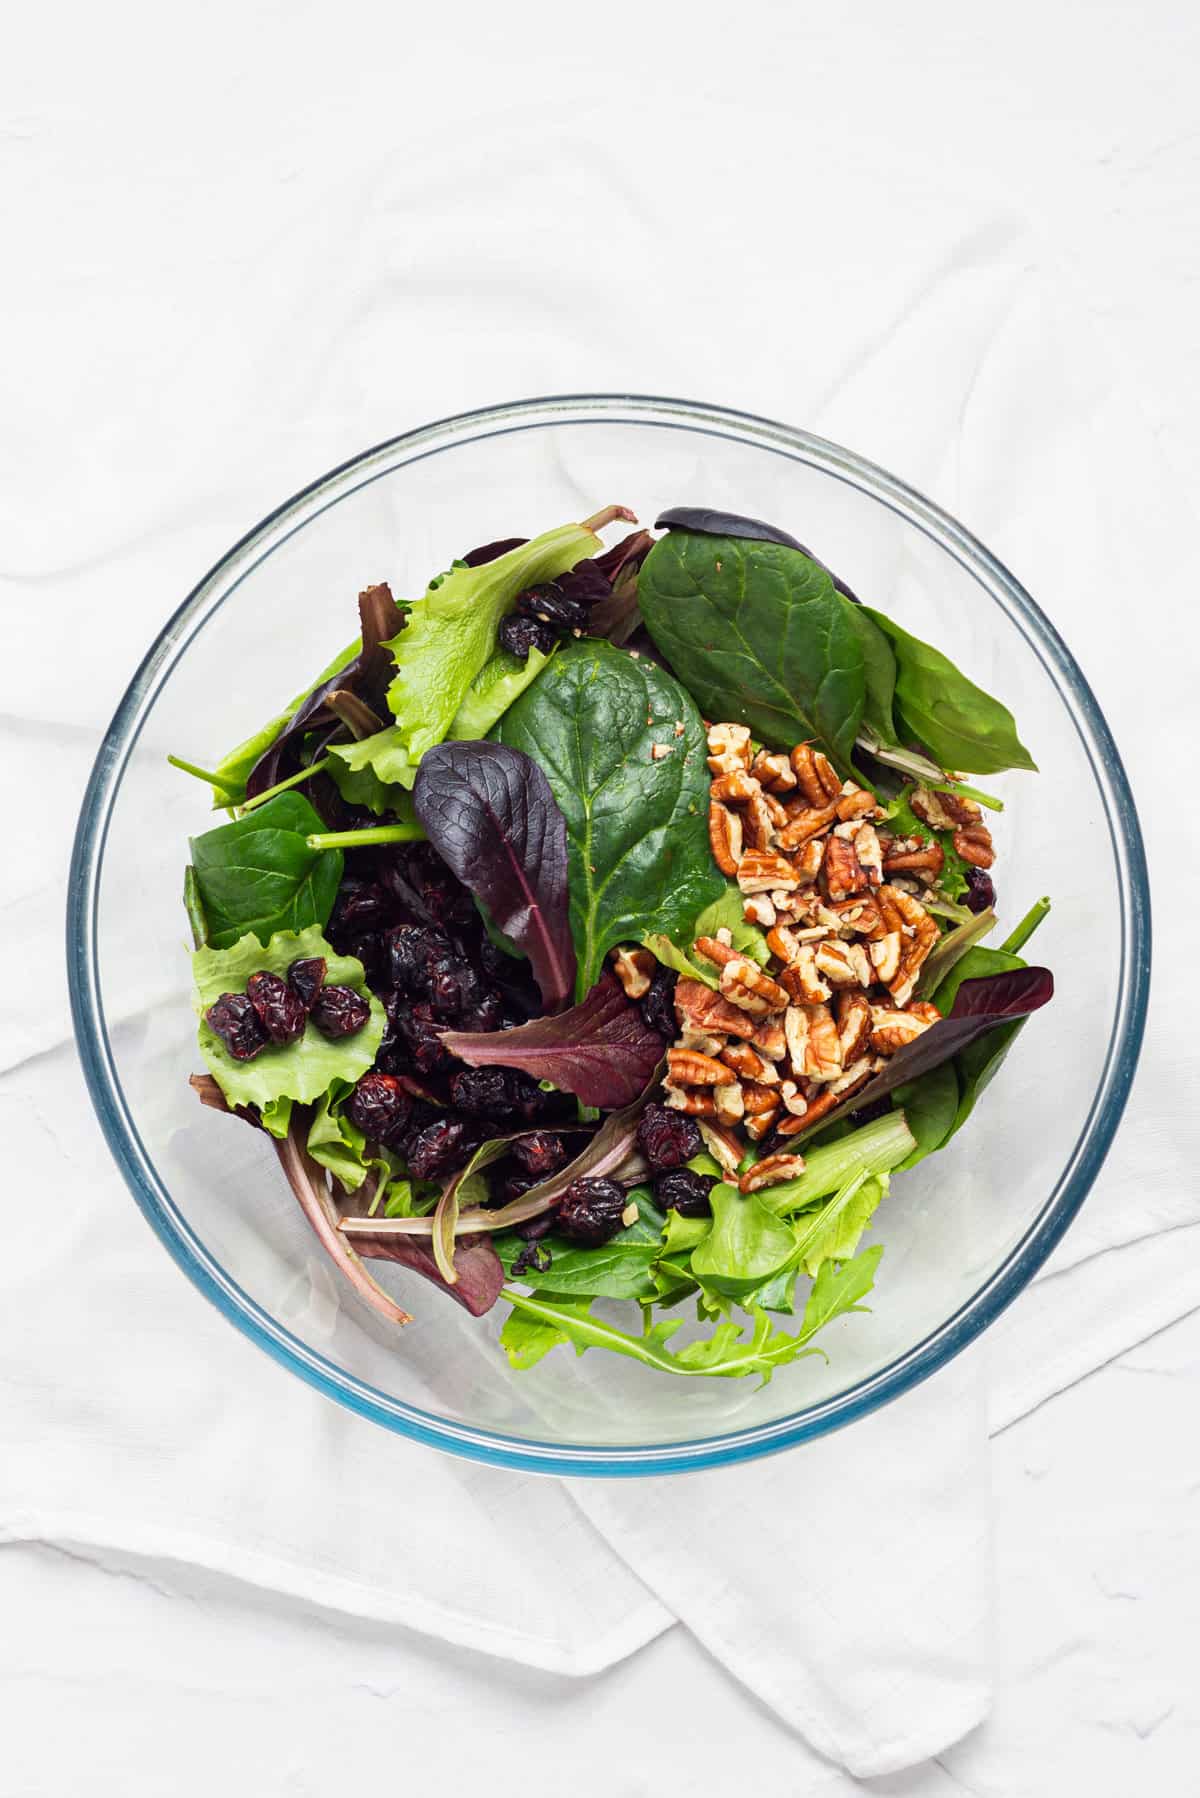 An overhead image of mixed salad greens, cranberries, and pecans.